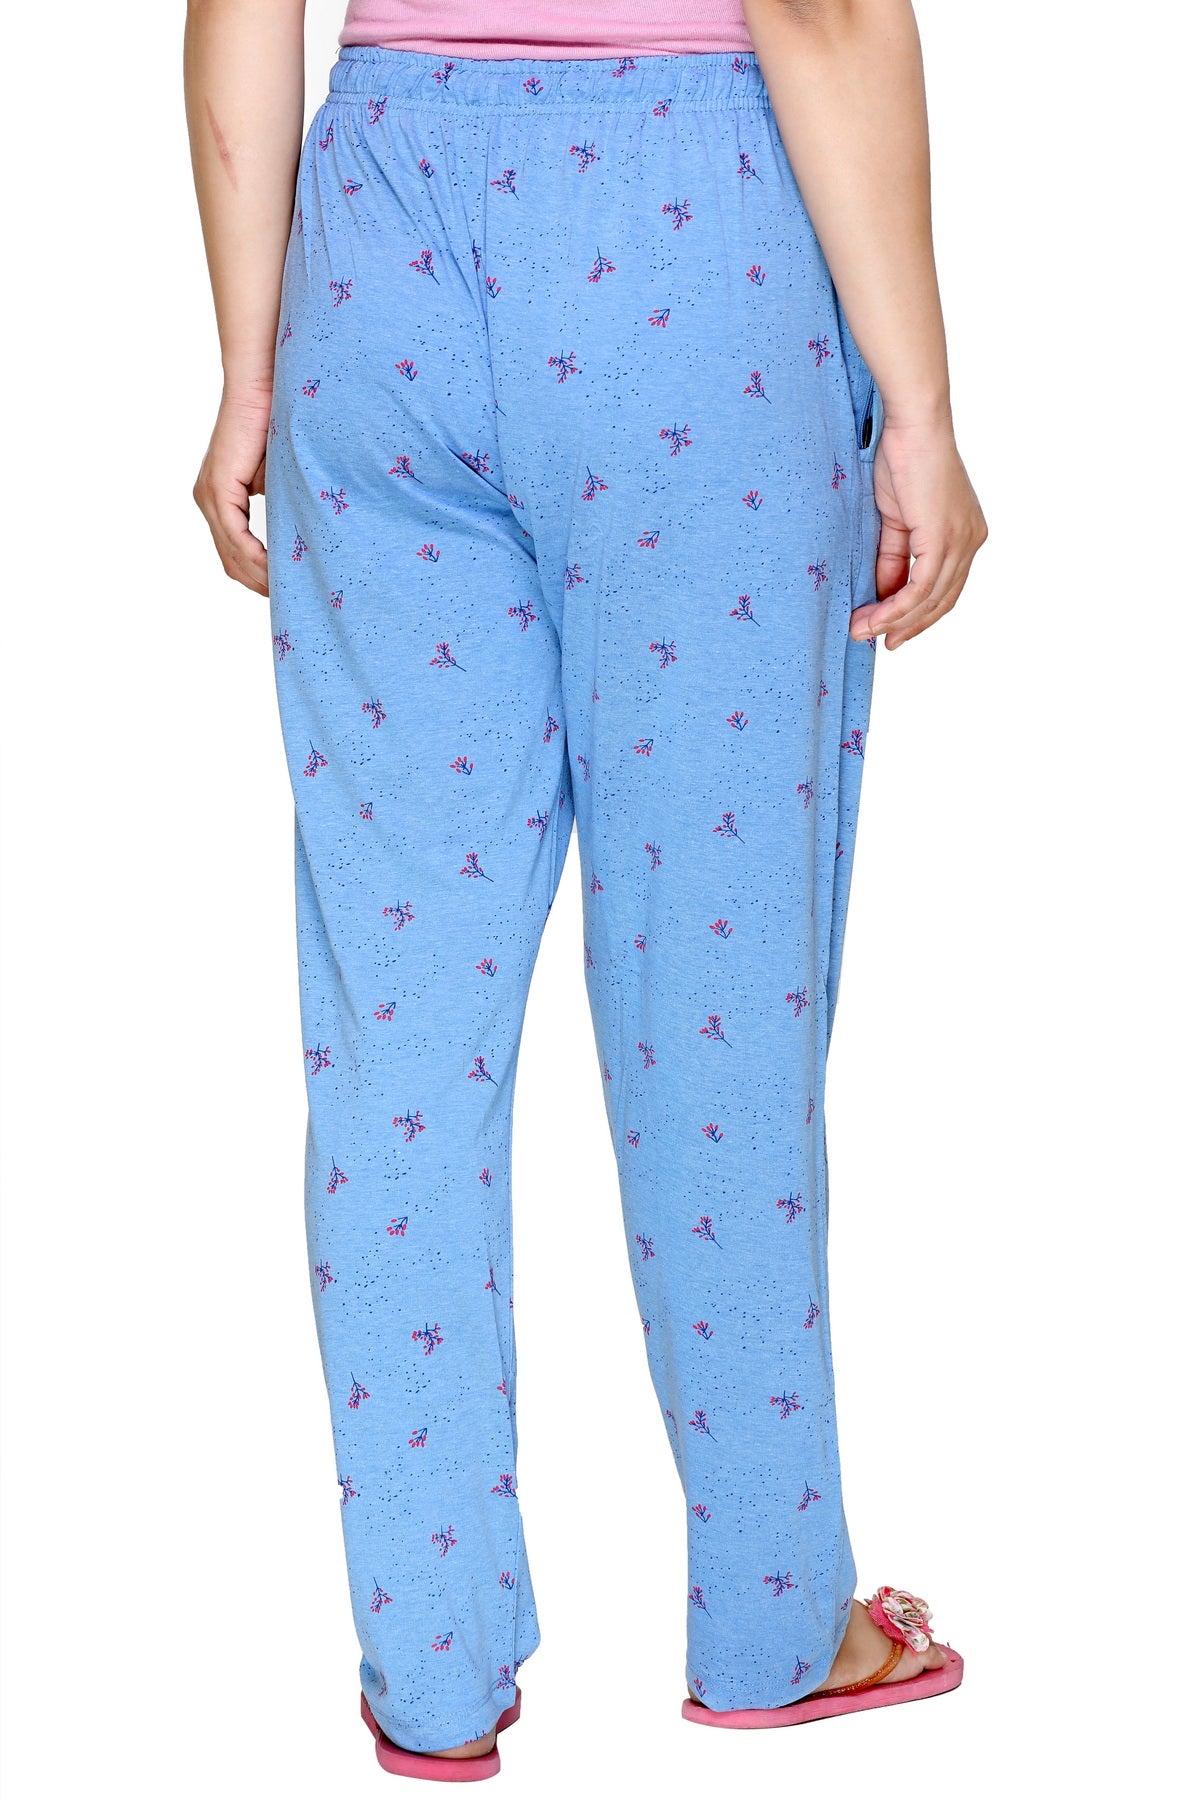 Cotton Printed Night Pants For Women -Sky Blue